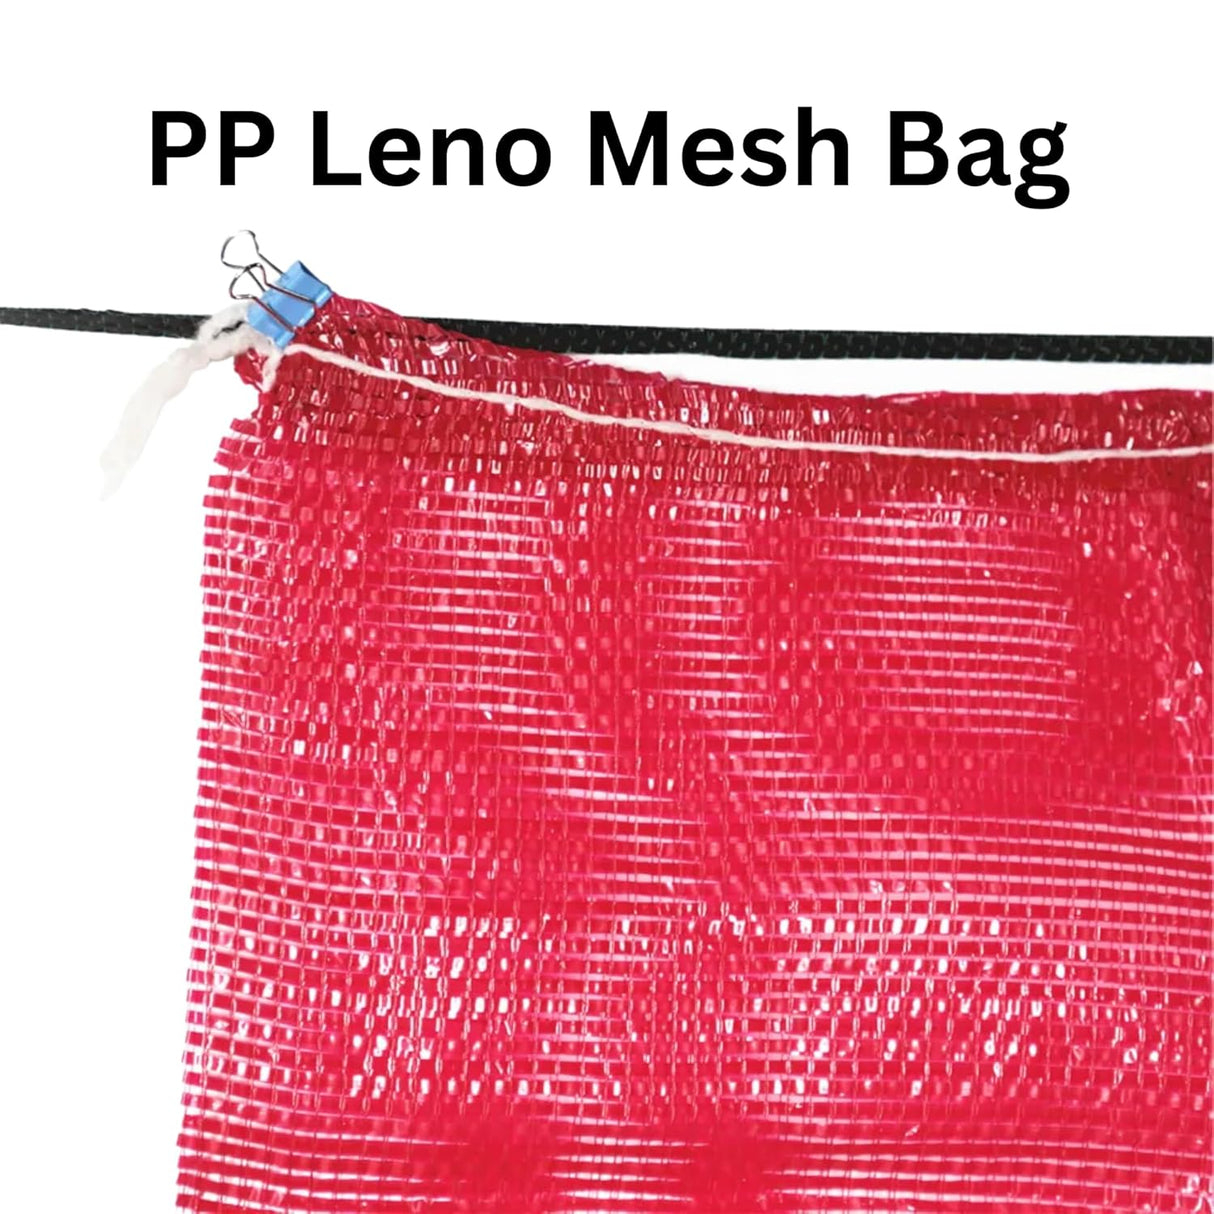 SINGHAL Leno Mesh Storage Produce Bags Reusable for Vegetable Storage Bags Onion Storage Washable Net Bags (30x20 Inch - Yellow, 25)